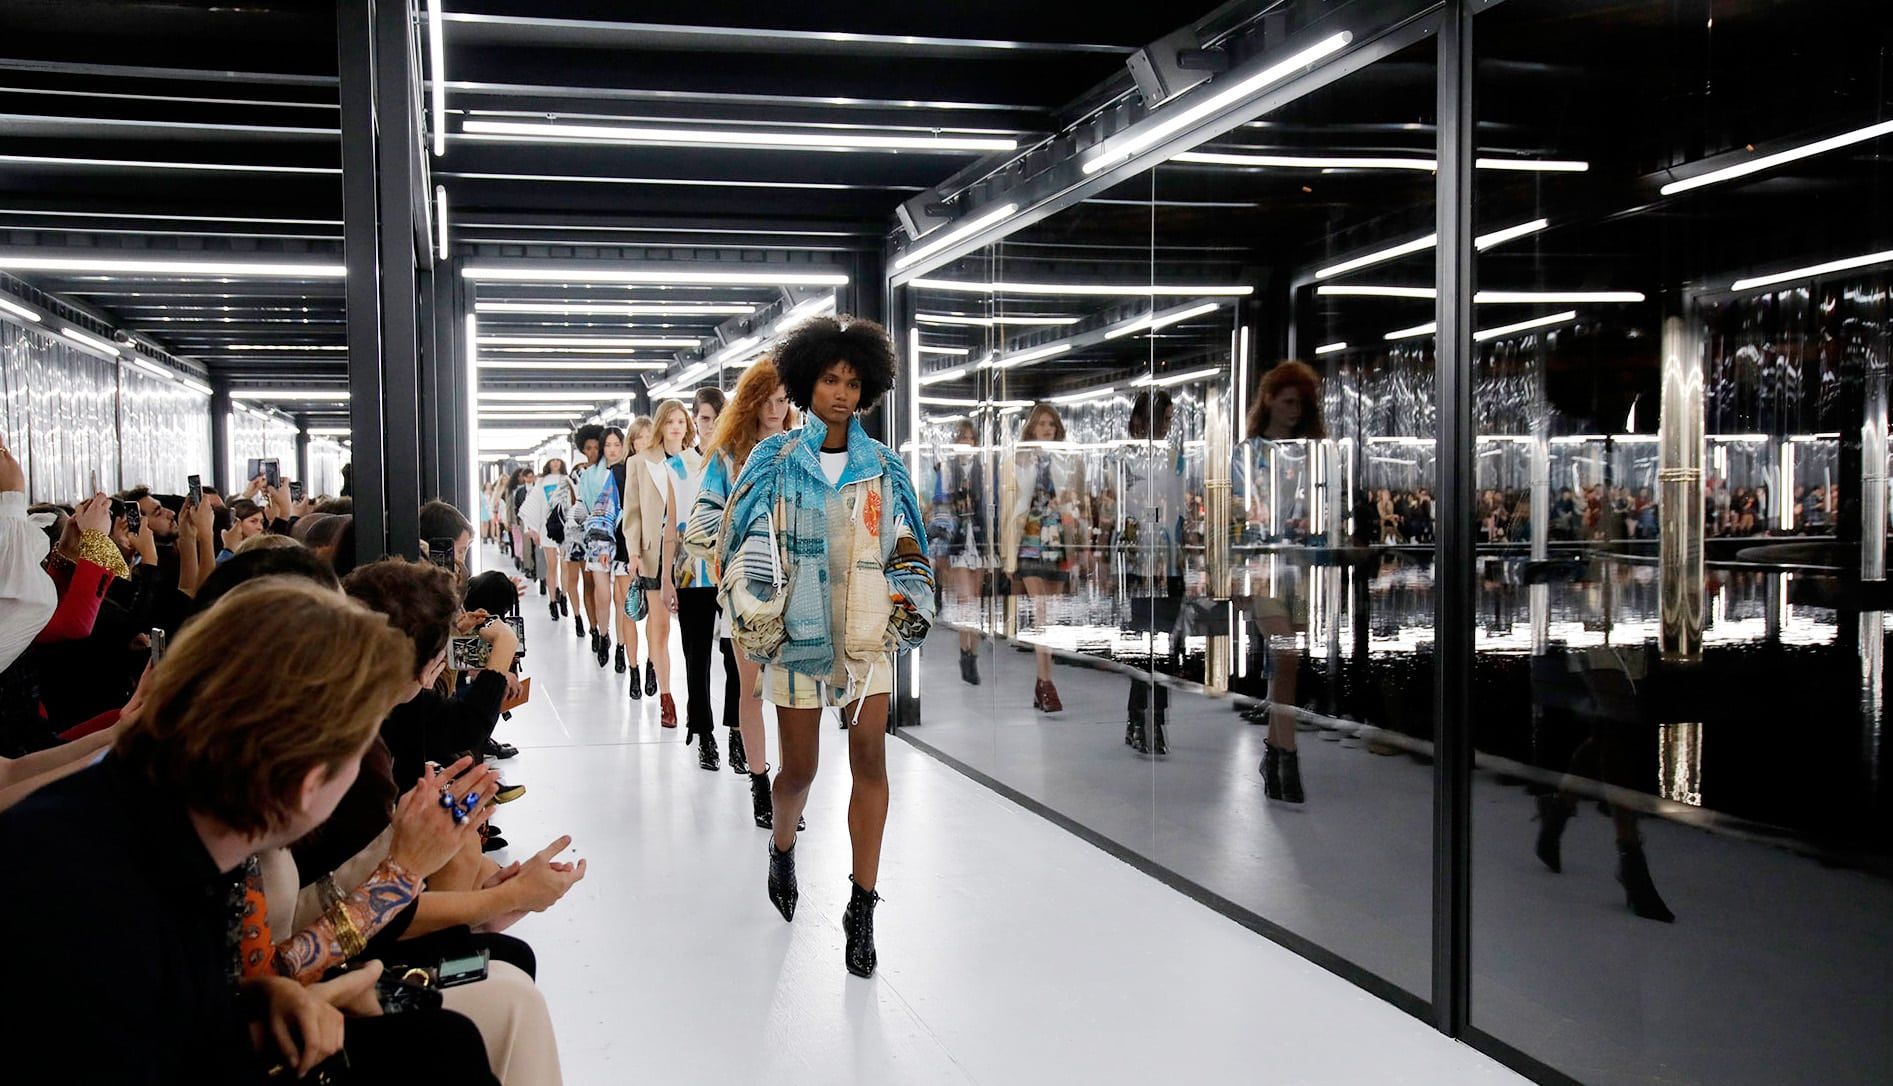 Louis Vuitton Spring 2018 Ready-to-Wear Collection